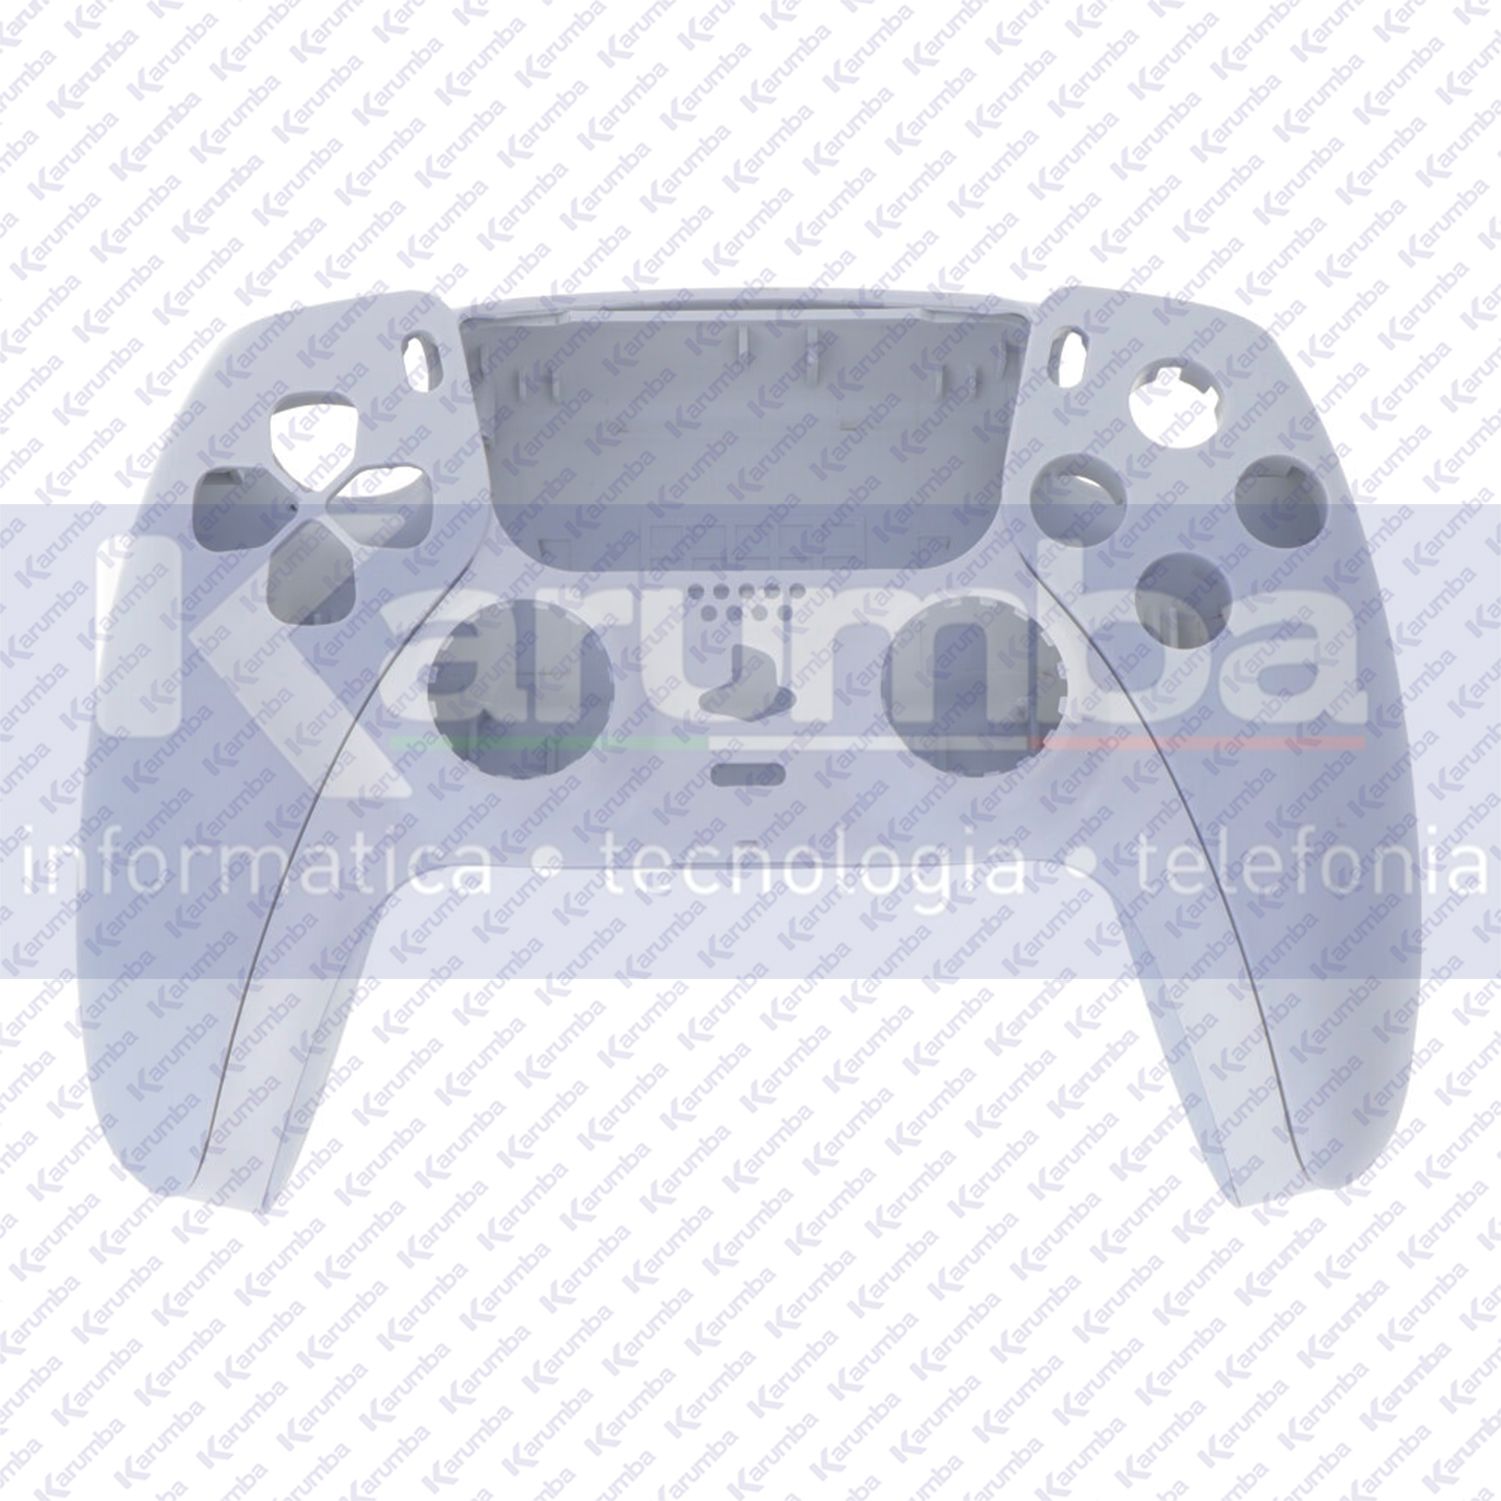 SCOCCA CASE PS5 COVER HOUSING CONTROLLER JOYSTICK PLAYSTATION 5 BIANCO WHITE